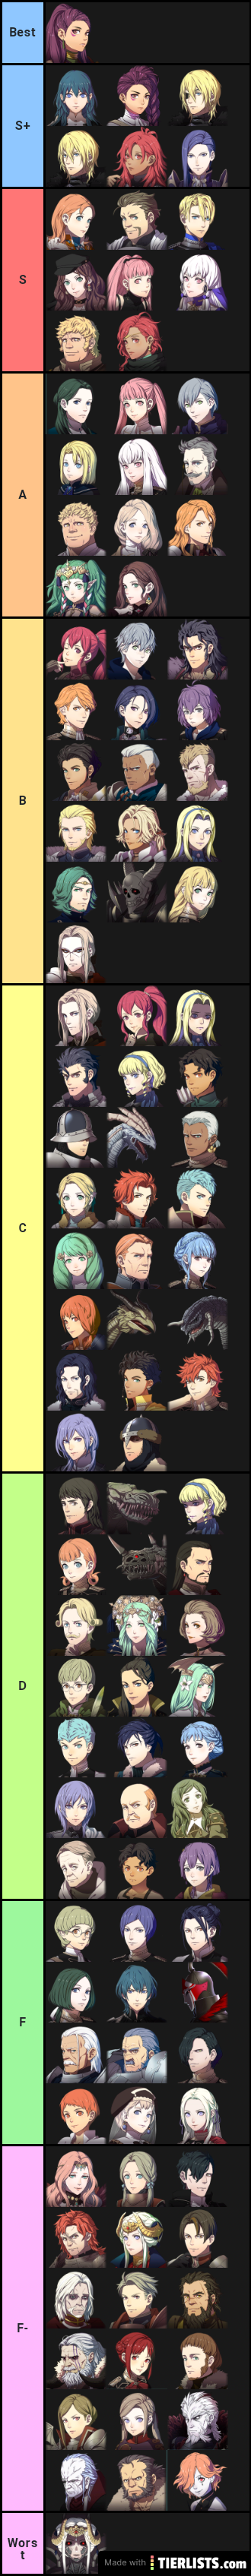 Ranking fe3h characters